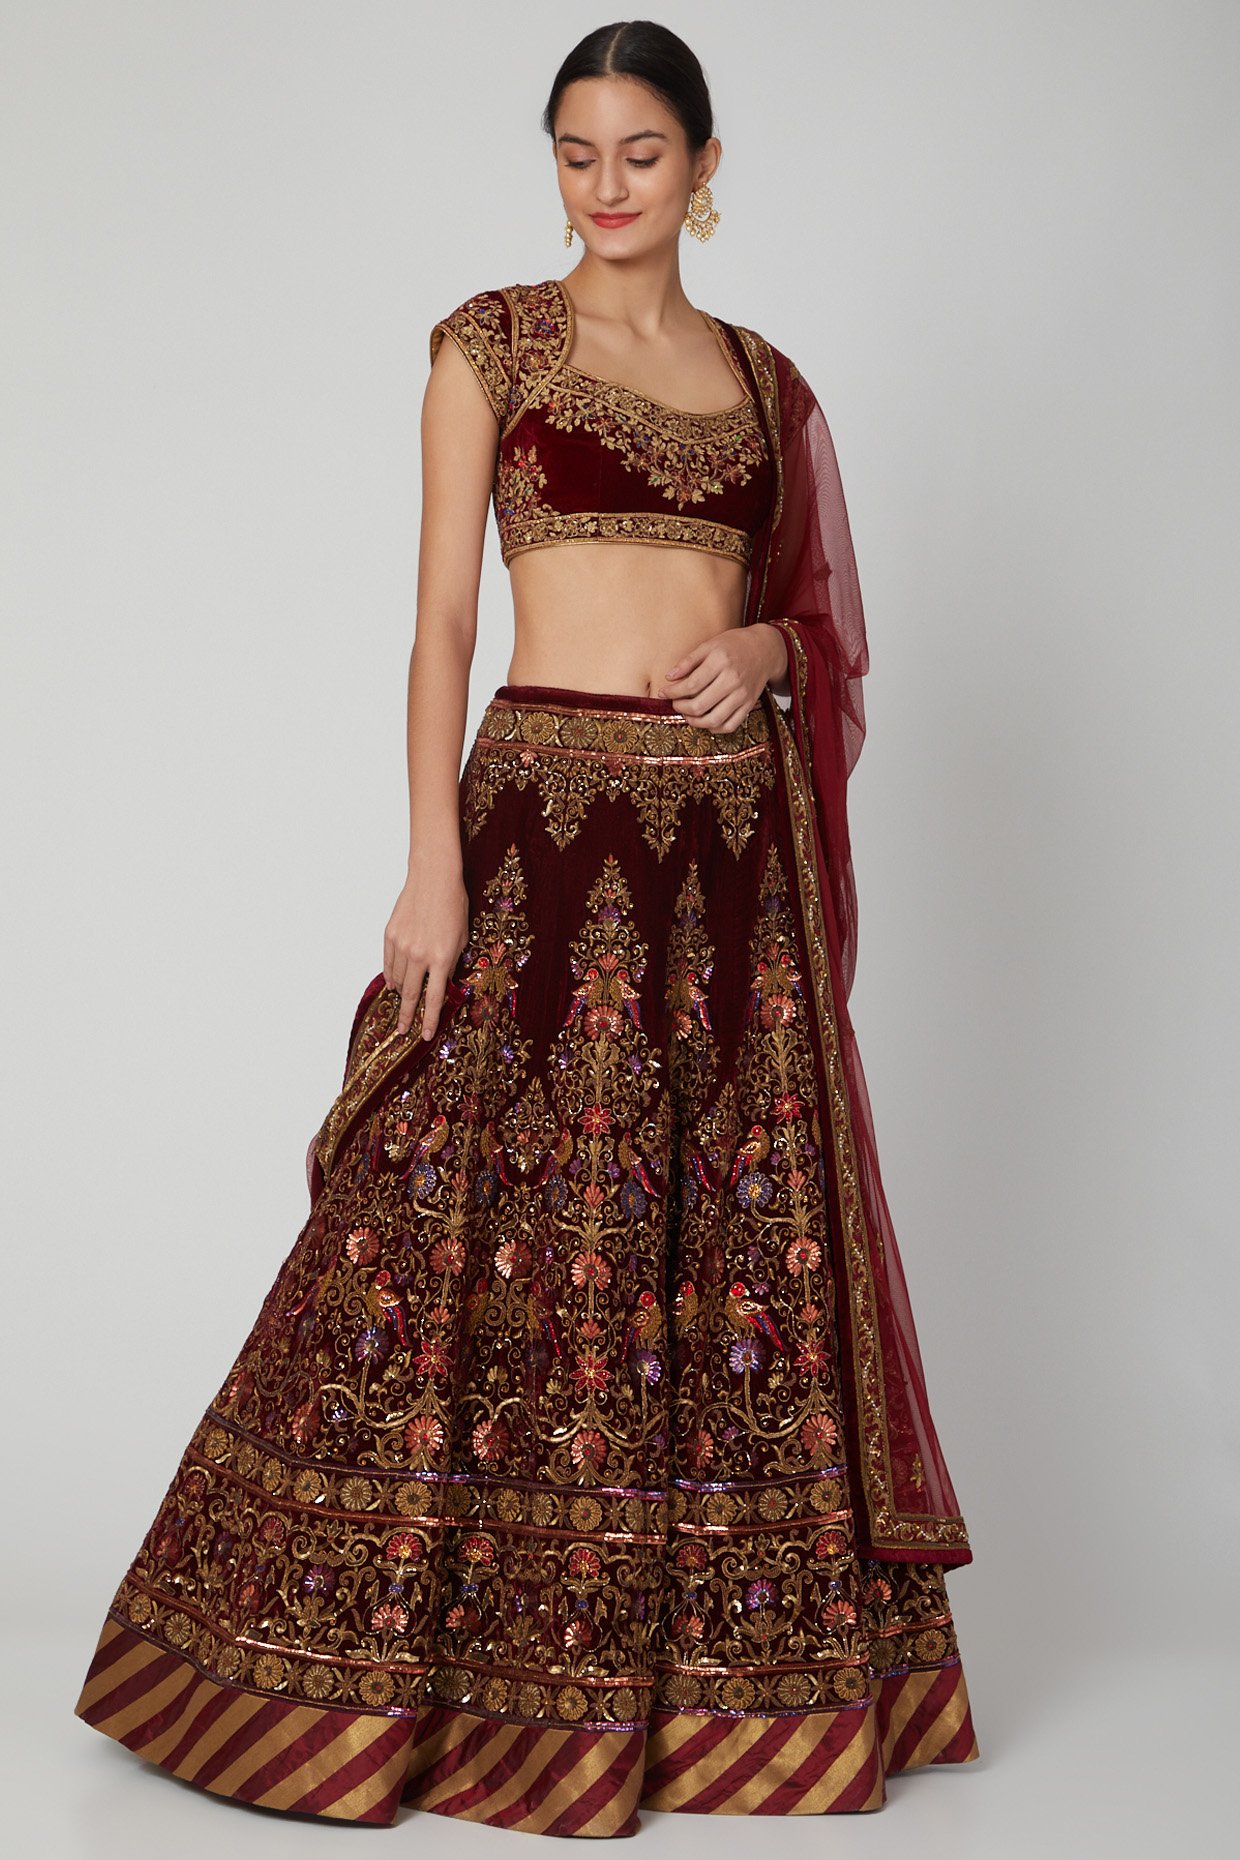 Bollywood Replica Sonam Kapoor Santoon Lehenga In Off White and Gold Colour  228-A-2 | Latest Designer Collection